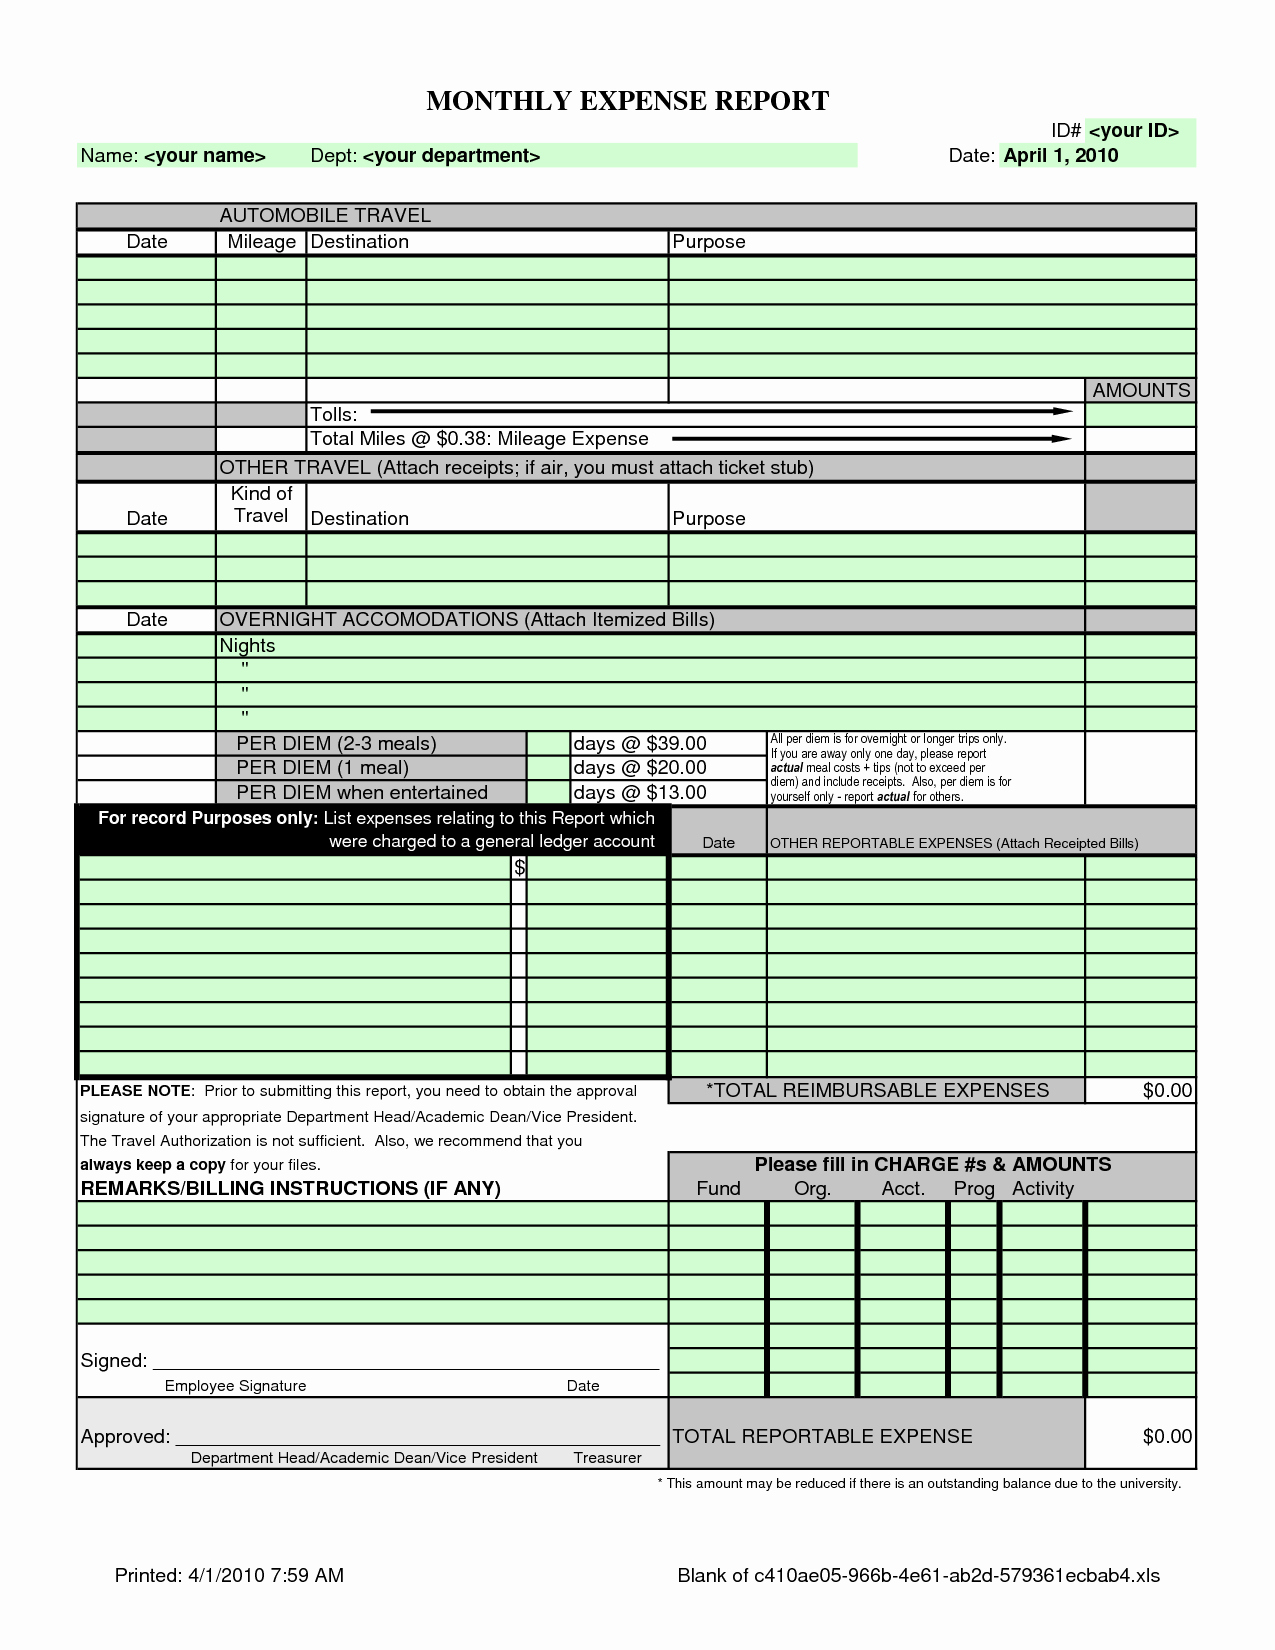 Personal Monthly Expense Report Template Inspirational Monthly Expense Report and Reimbursement form Sample